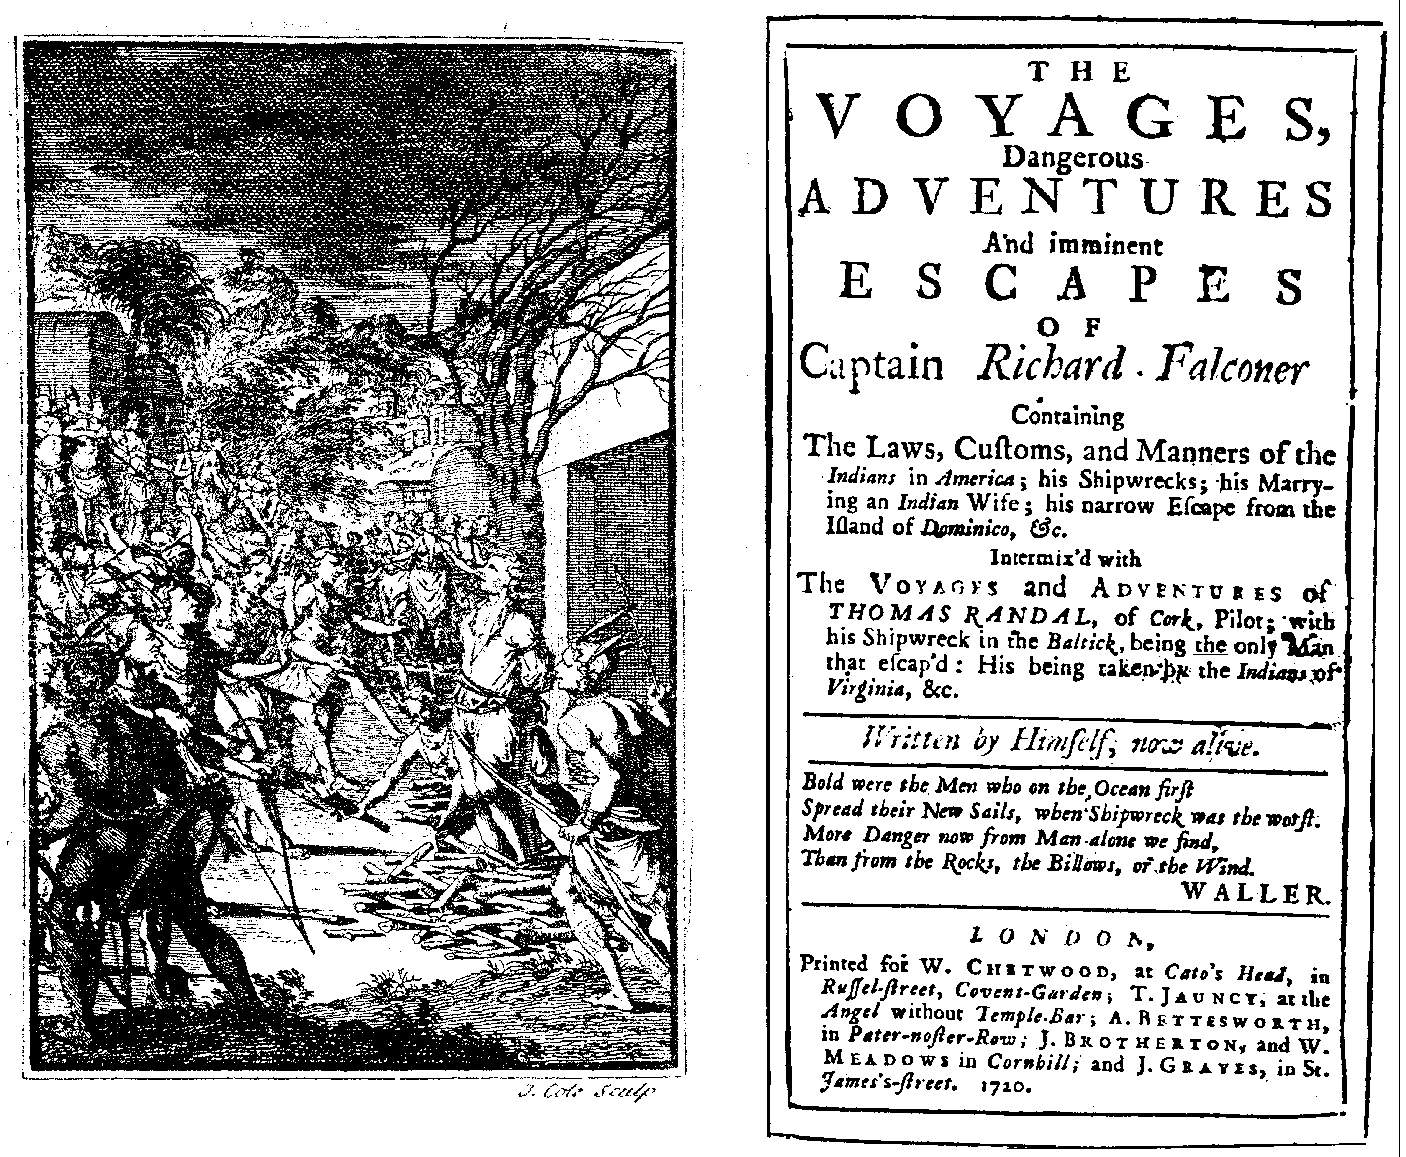 The Voyages, Dangerous Adventures and imminent Escapes of Captain Richard Falconer (London: W. Chetwood/ T. Jauncy/ A. Bettesworth/ J. Brotherton/ W. Meadows/ J. Graves, 1720).